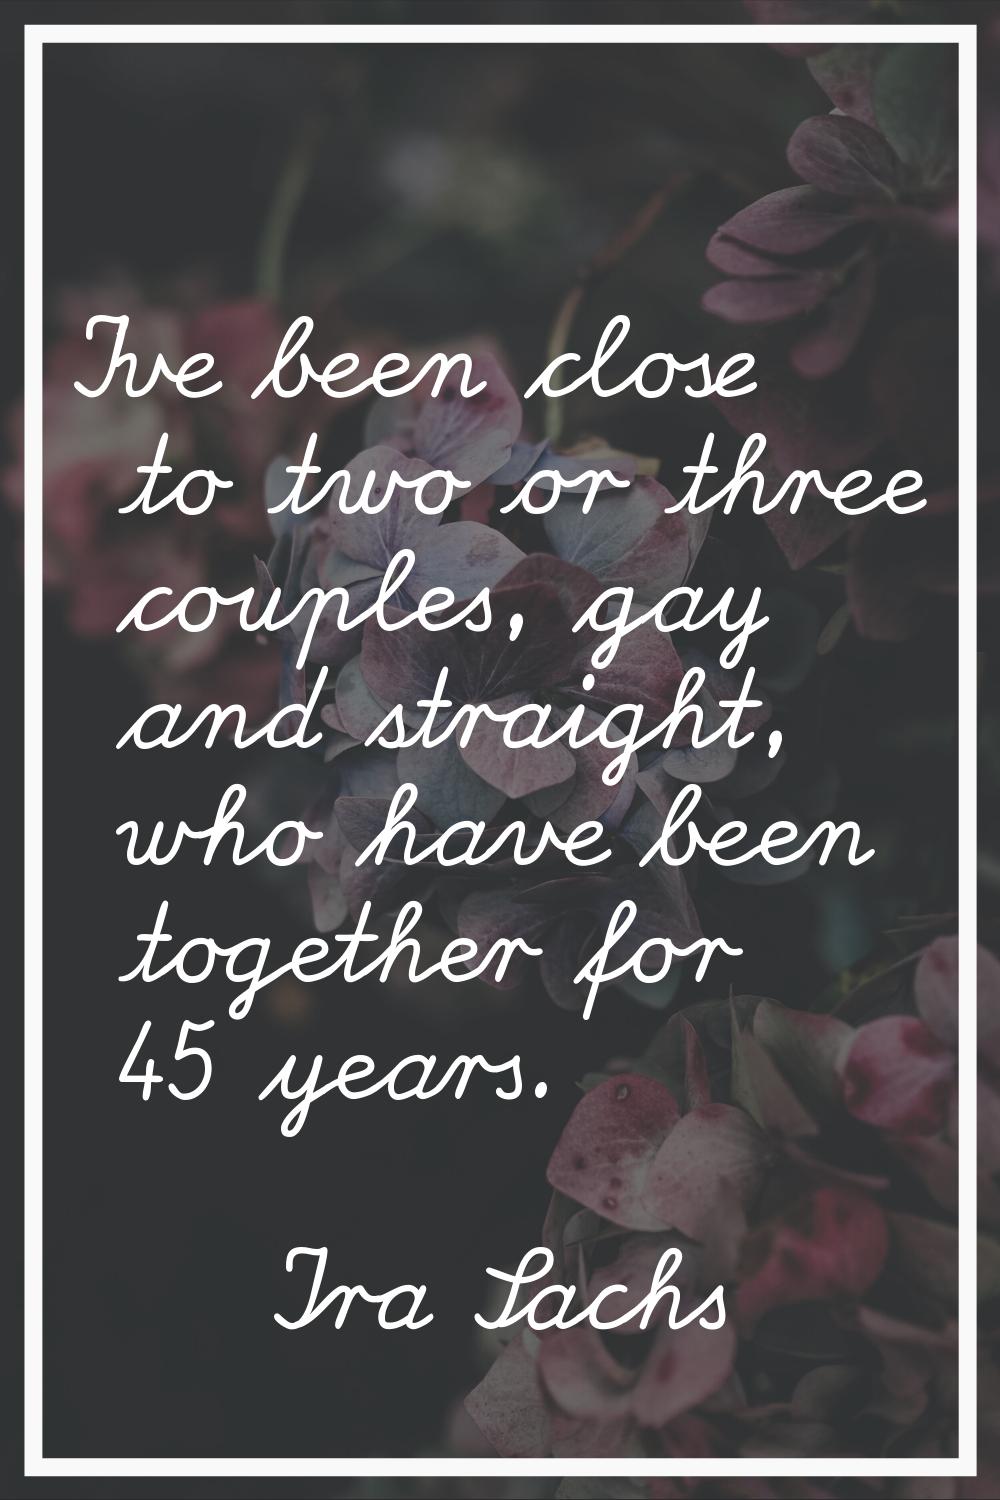 I've been close to two or three couples, gay and straight, who have been together for 45 years.